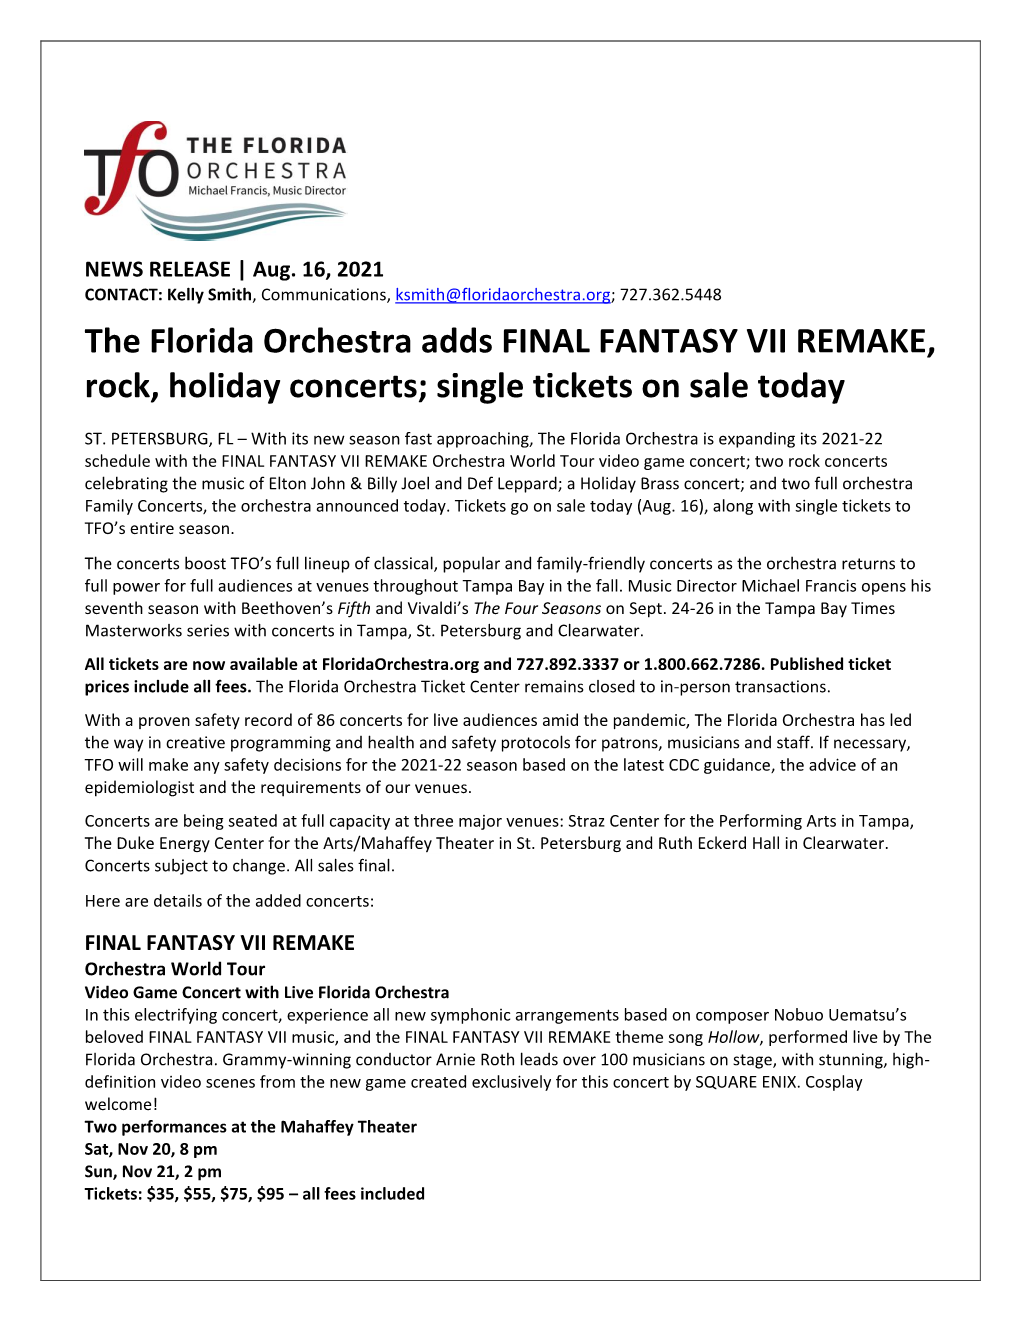 The Florida Orchestra Adds FINAL FANTASY VII REMAKE, Rock, Holiday Concerts; Single Tickets on Sale Today